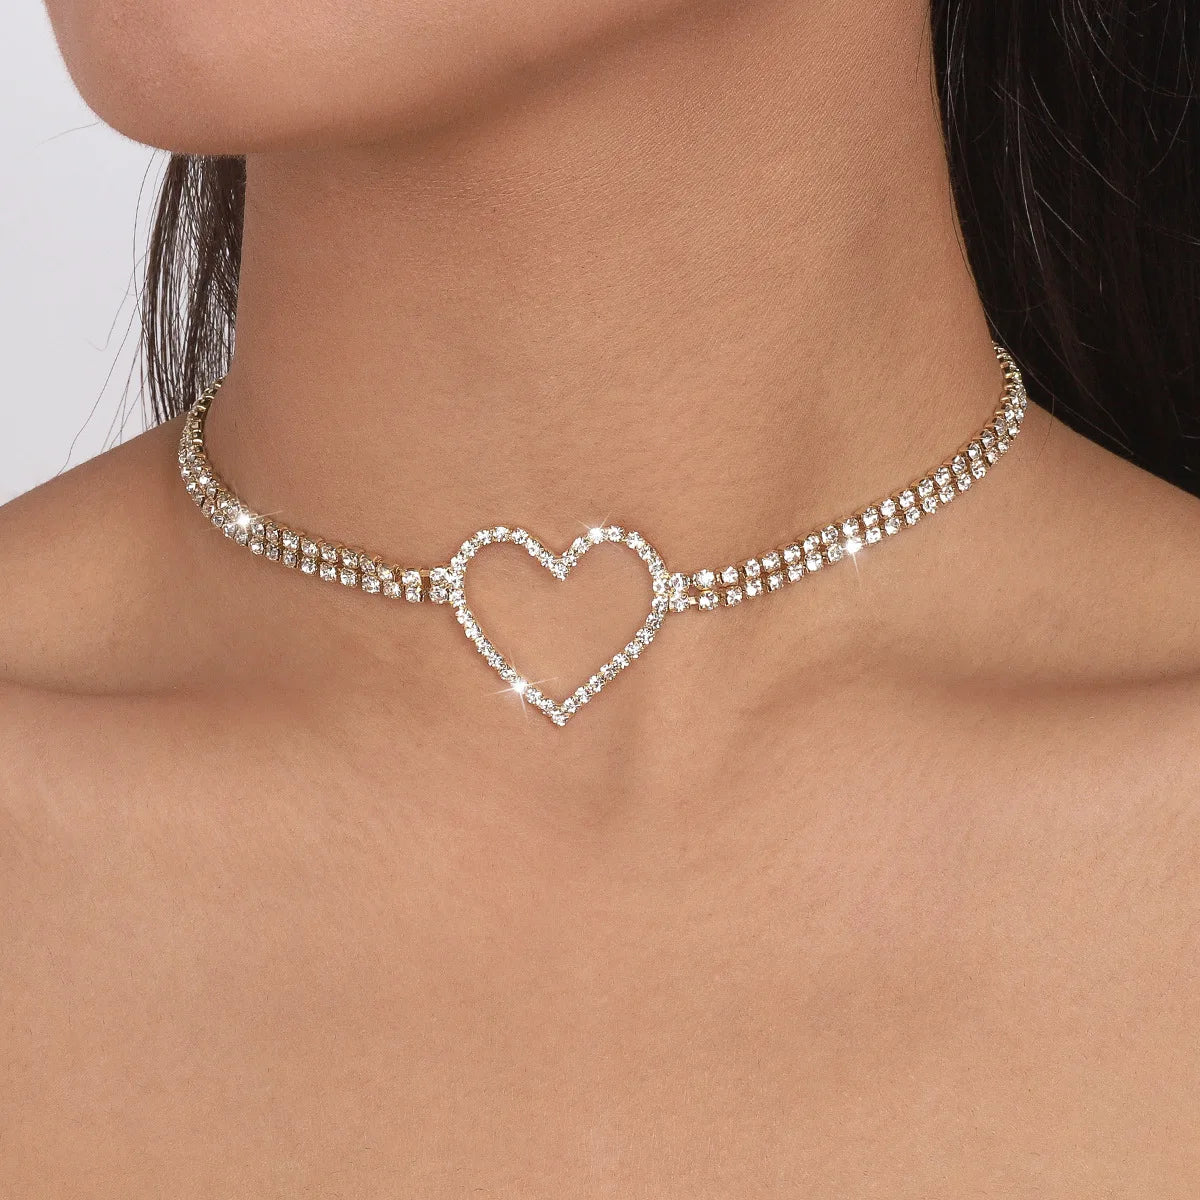 Romantic Crystal Heart Choker Necklace For Women Elegant Party Wedding Statement Necklace Fashion Jewelry Girls-Dollar Bargains Online Shopping Australia